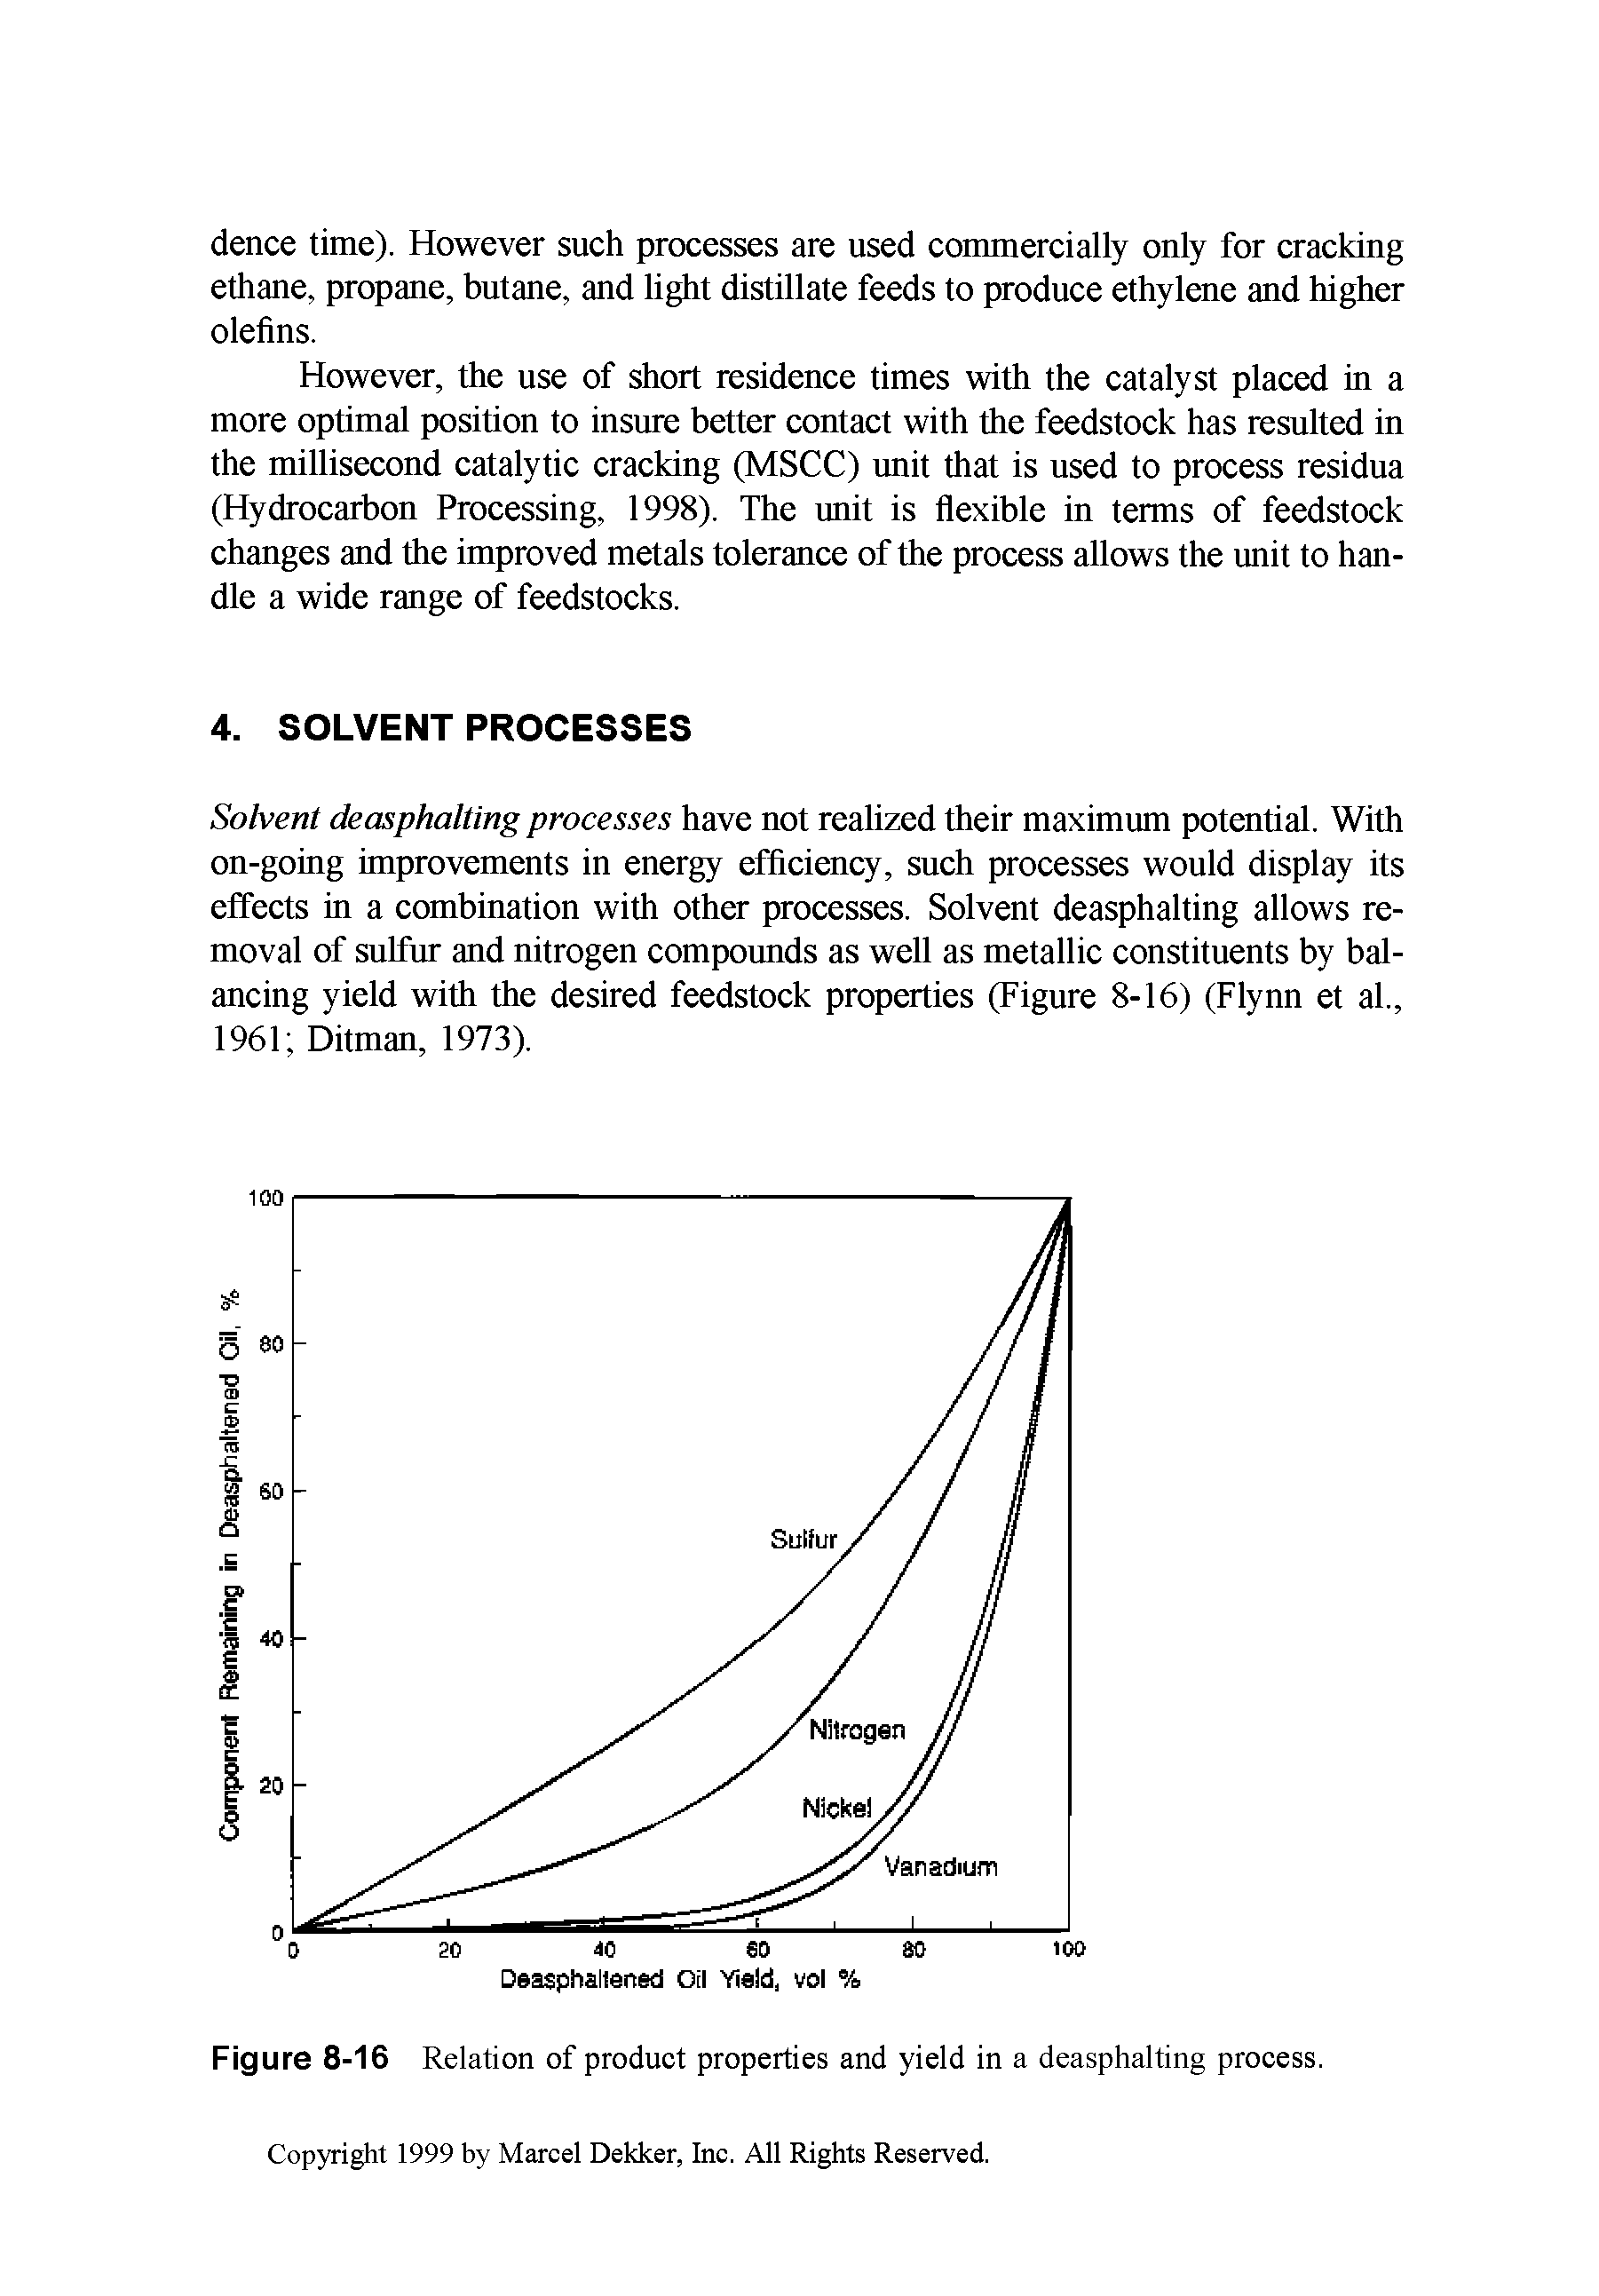 Figure 8-16 Relation of product properties and yield in a deasphalting process.